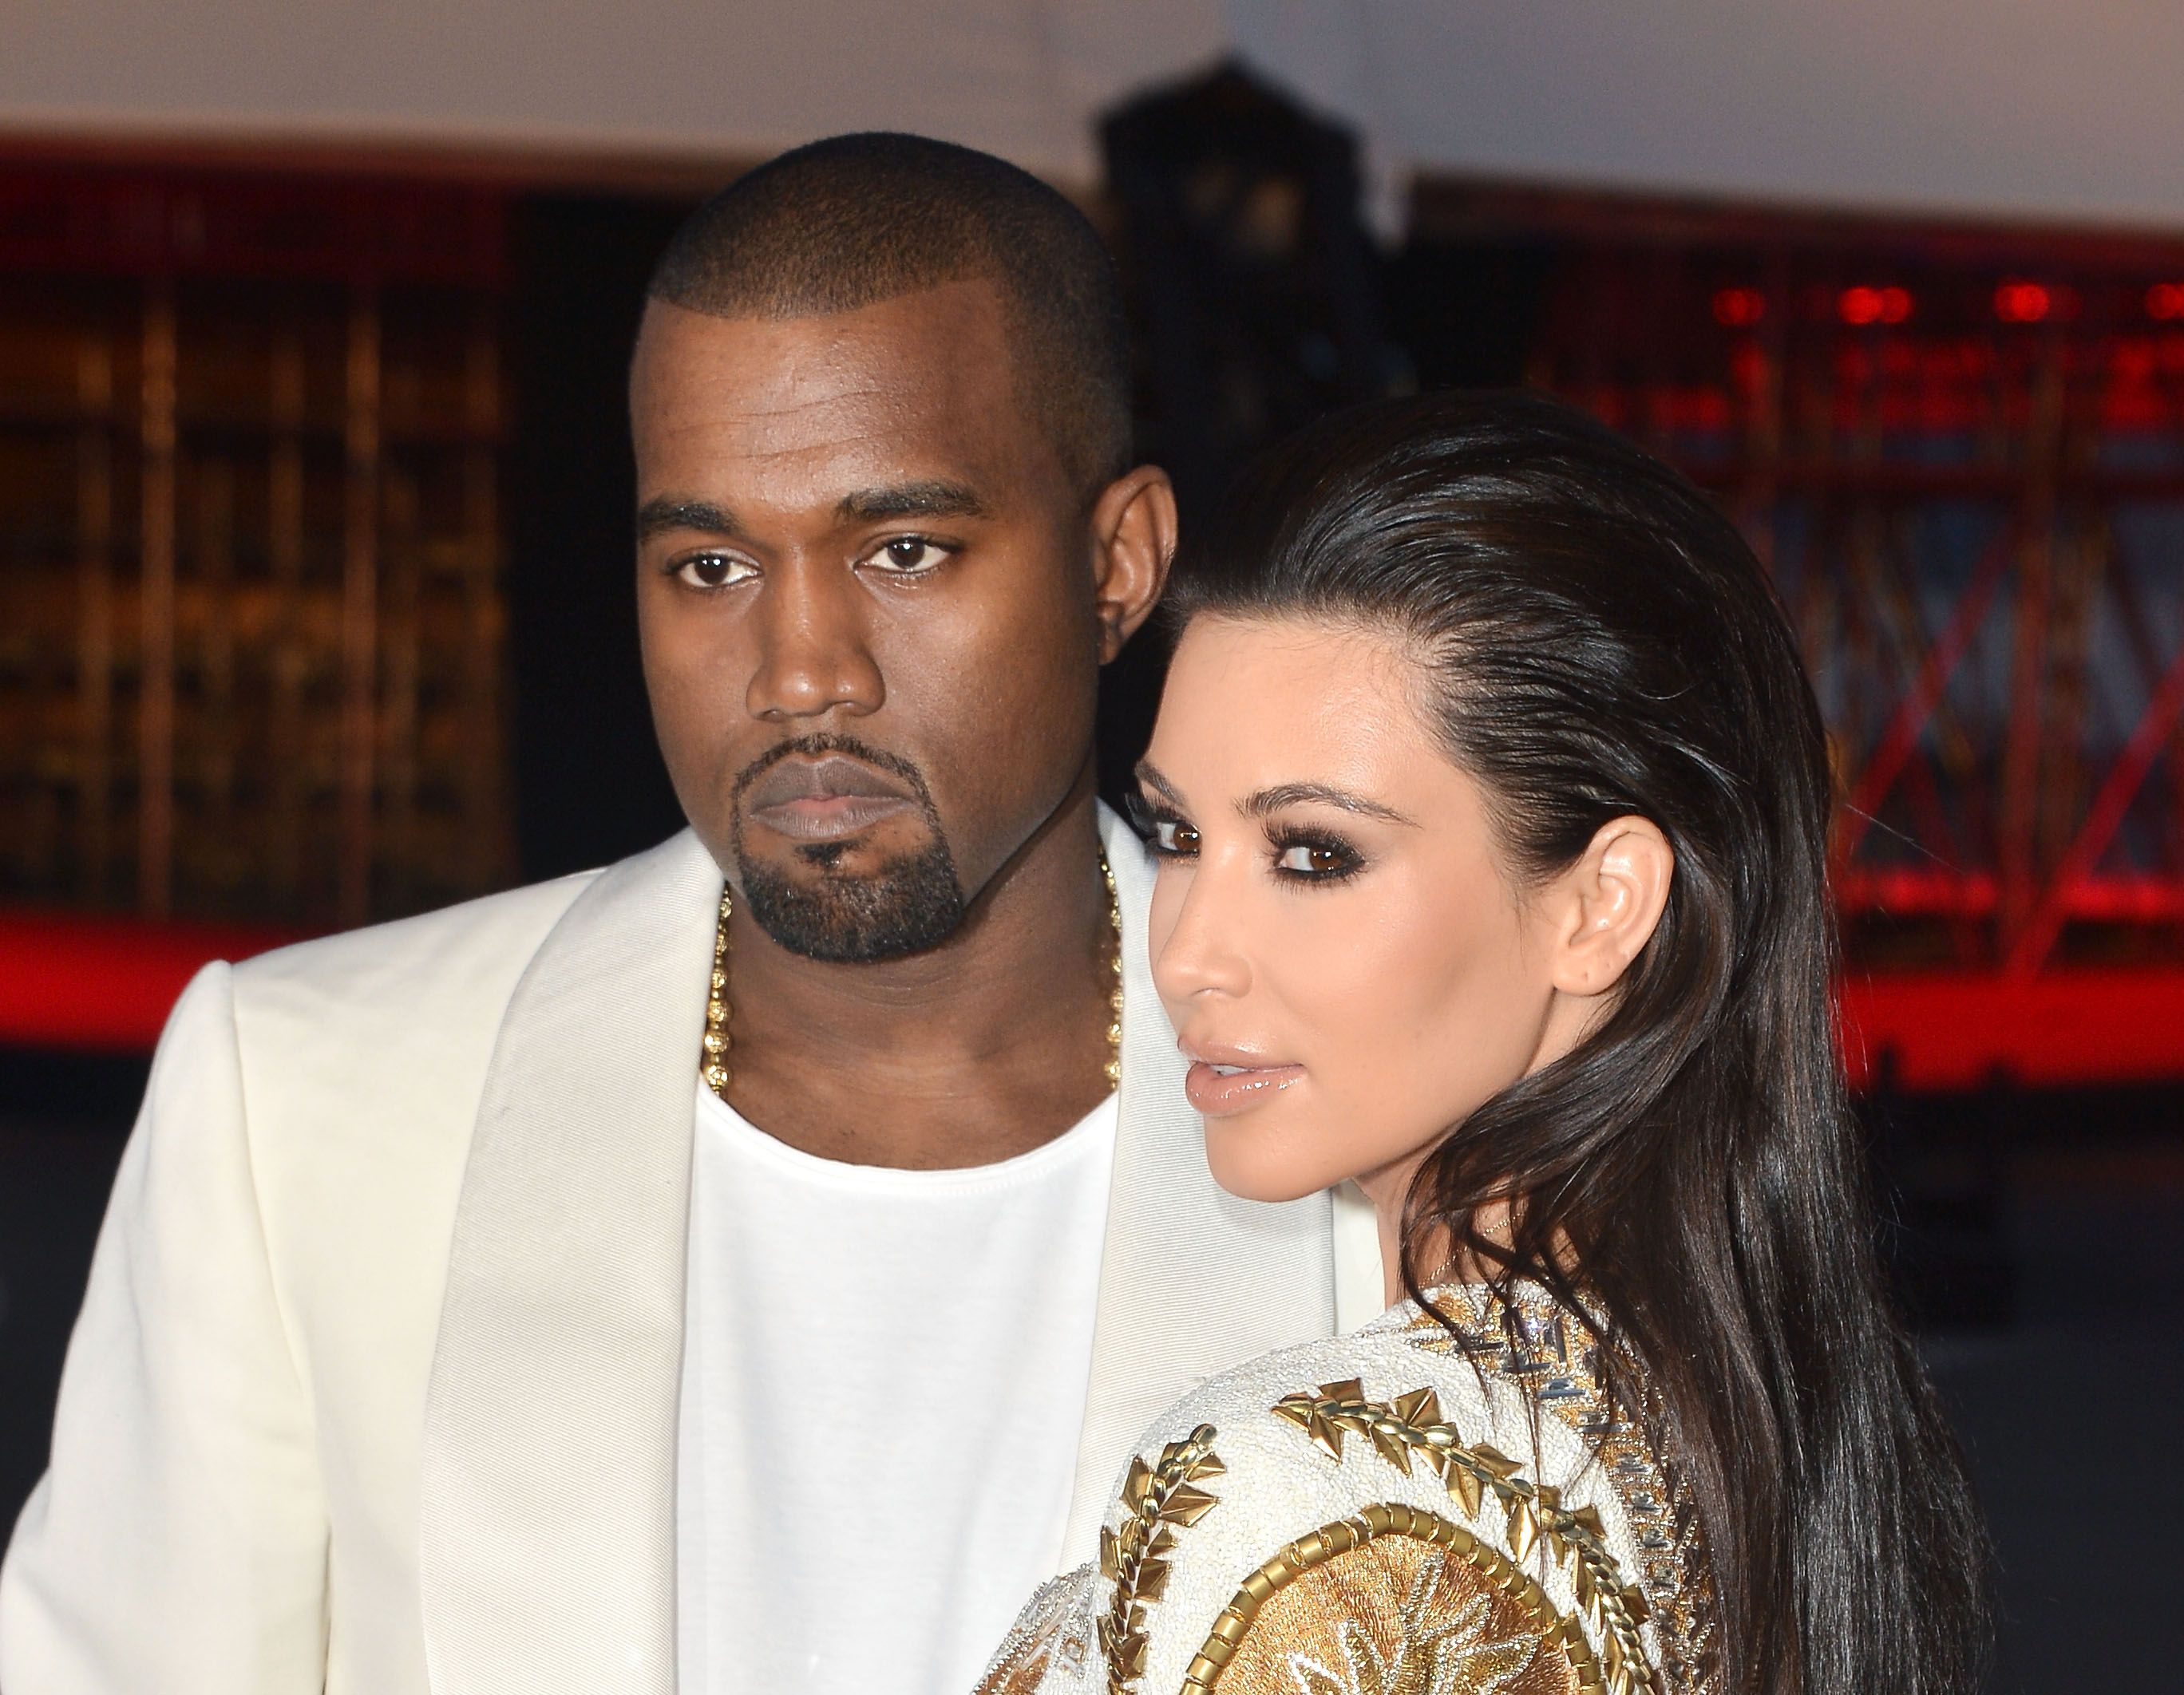  Kanye West and Kim Kardashian at the premiere of "Cruel Summer" in 2012 in Cannes | Source: Getty Images